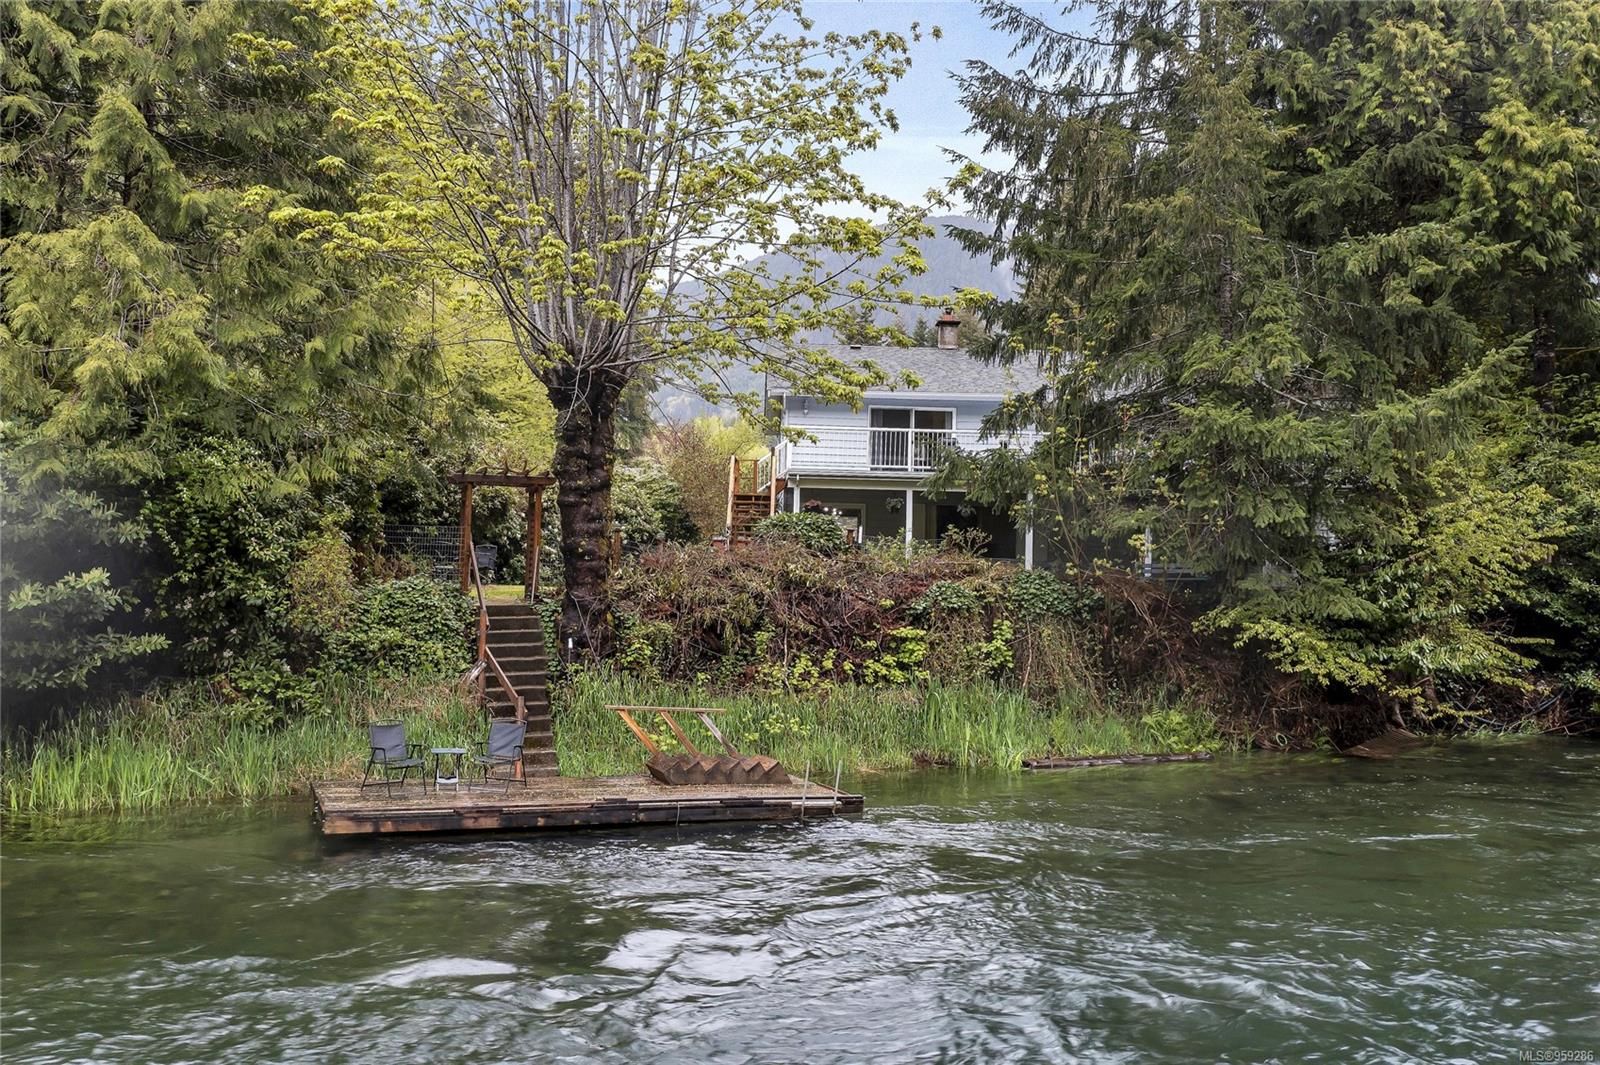 Welcome to 7996 Greendale Road on the beautiful Cowichan River!